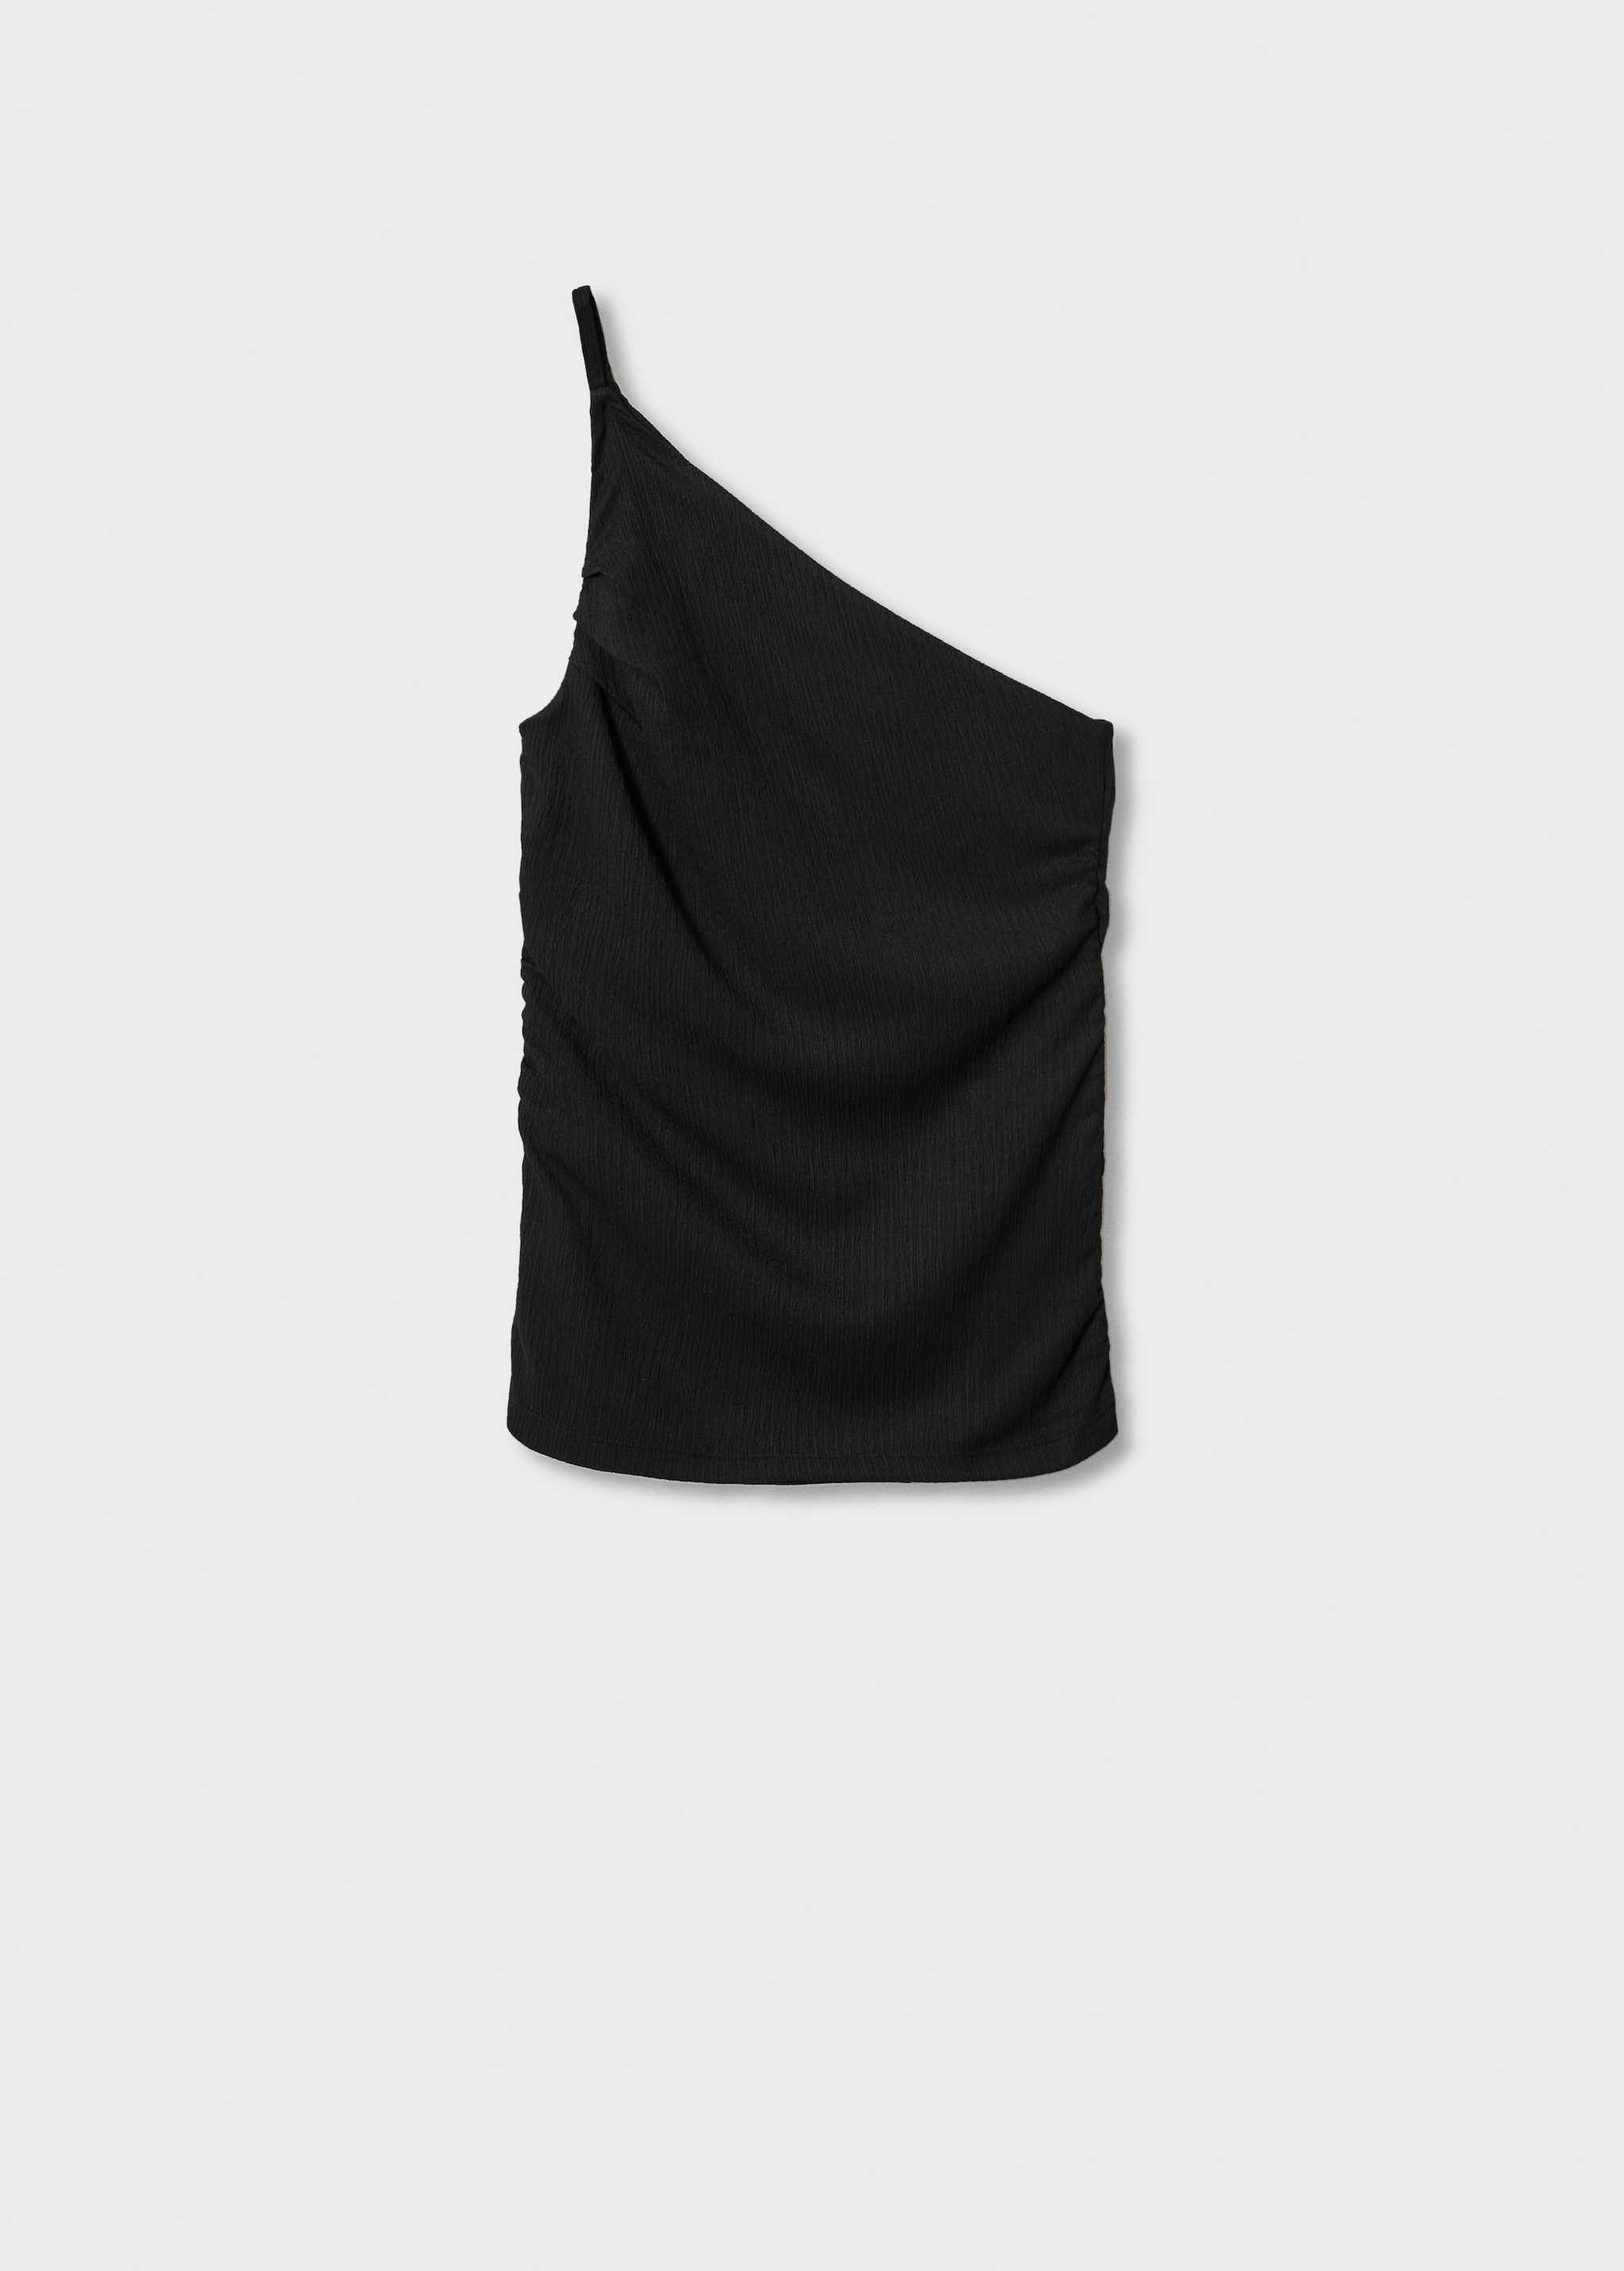 Asymmetrical textured top - Article without model